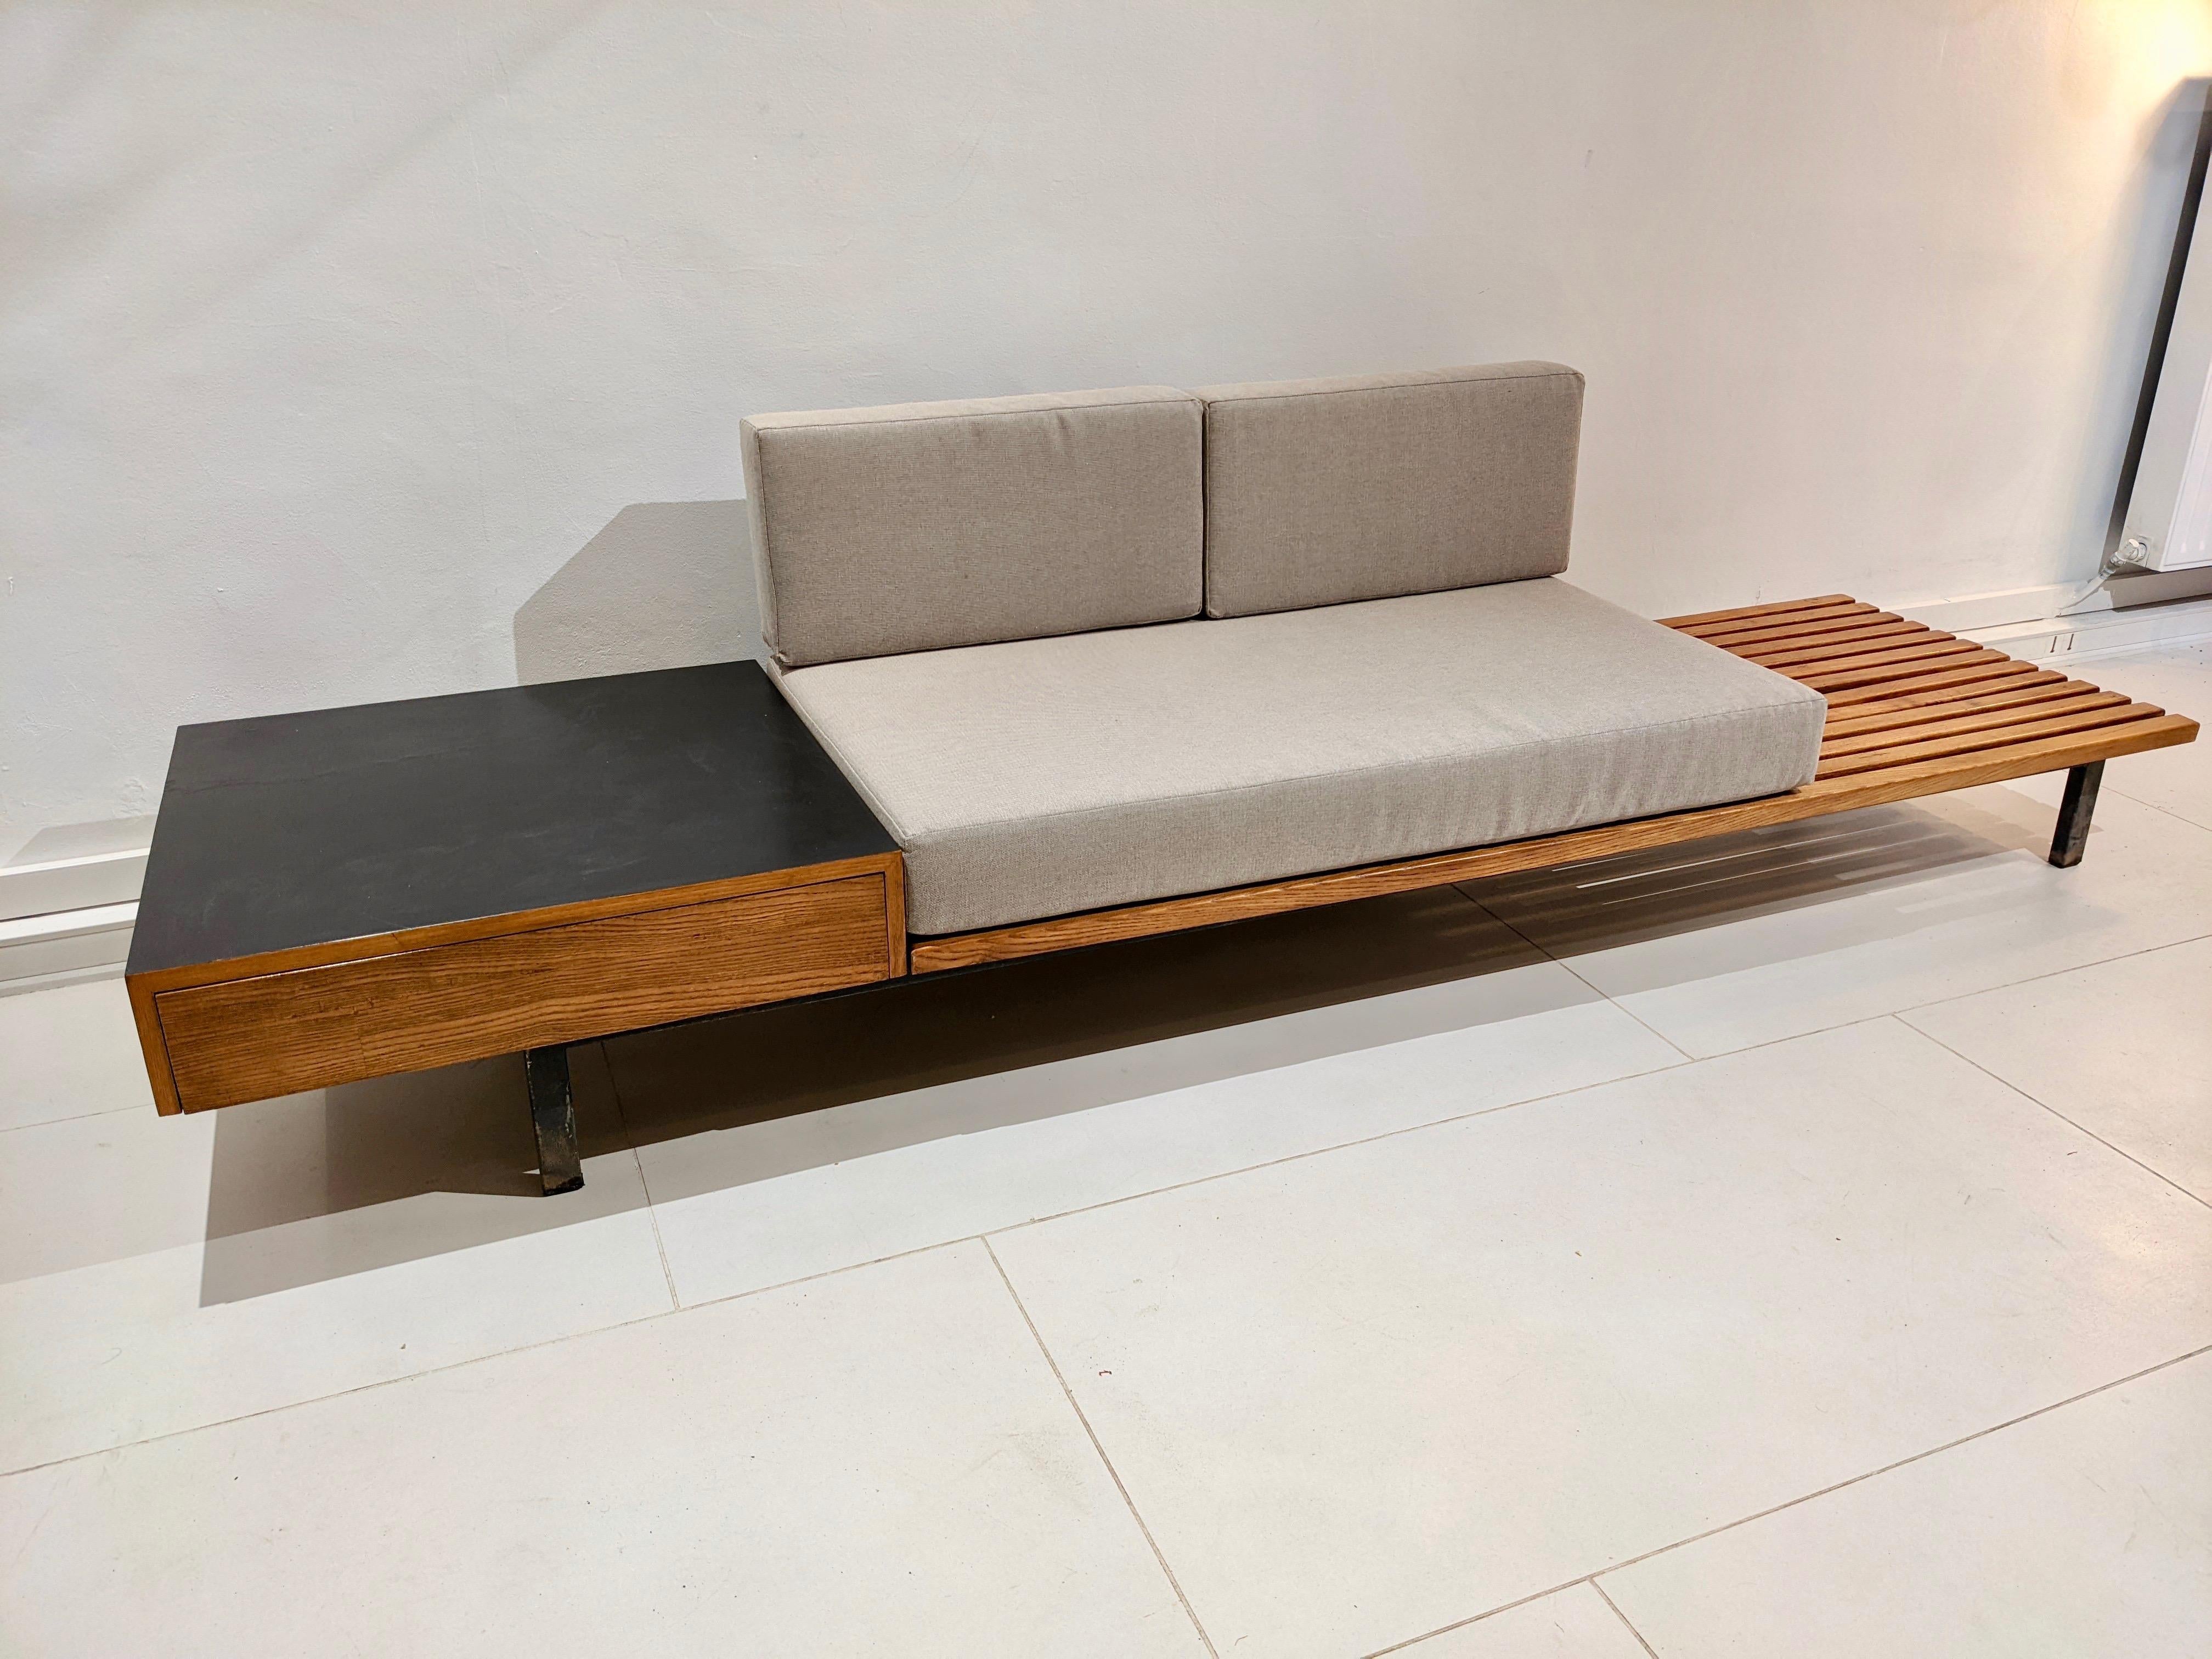 Cansado bench with drawer and cushion in grey fabric by Charlotte Perriand. Year 1954. Steph Simon edition. Good condition. 
Provenance : Cansado mining city, Mauritania, Africa.
Some defects are visible on the front of the drawer and on the